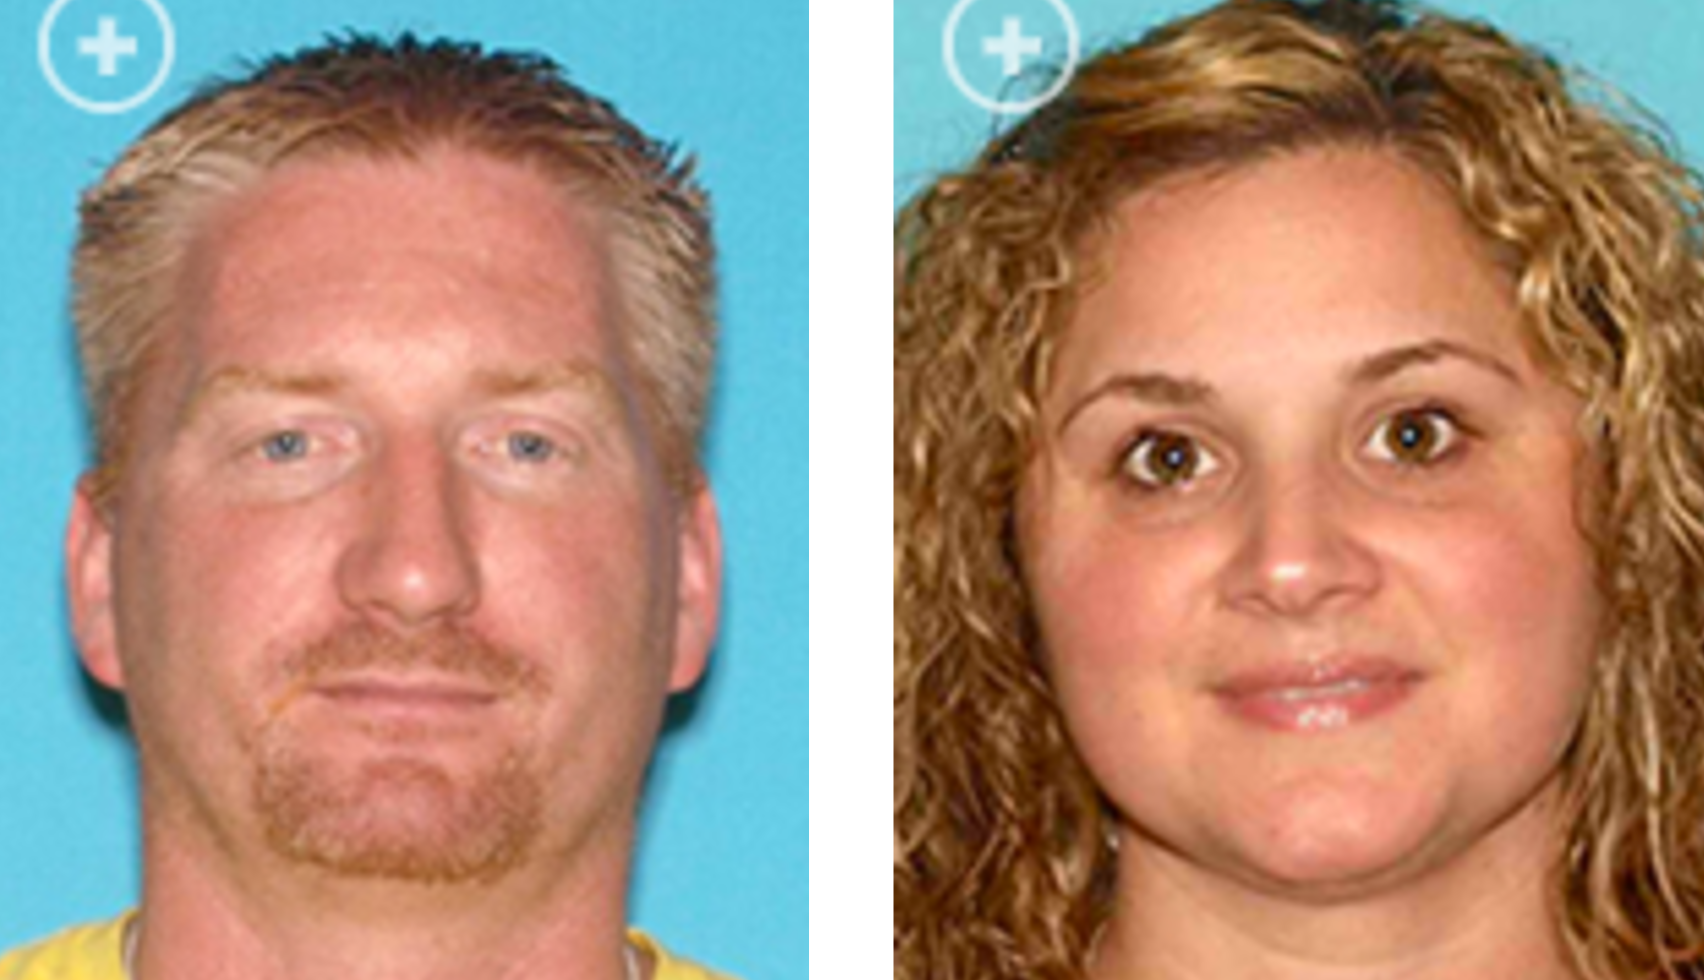  Jeffrey Colmyer, 41, and Tiffany Cimino, 33, both of Little Egg Harbor, were indicted Tuesday on various charges related to  allegedly stealing hundreds of thousands of dollars from Sandy victims needing home contracting services. (Image courtesy of the NJ Office of Attorney General)  